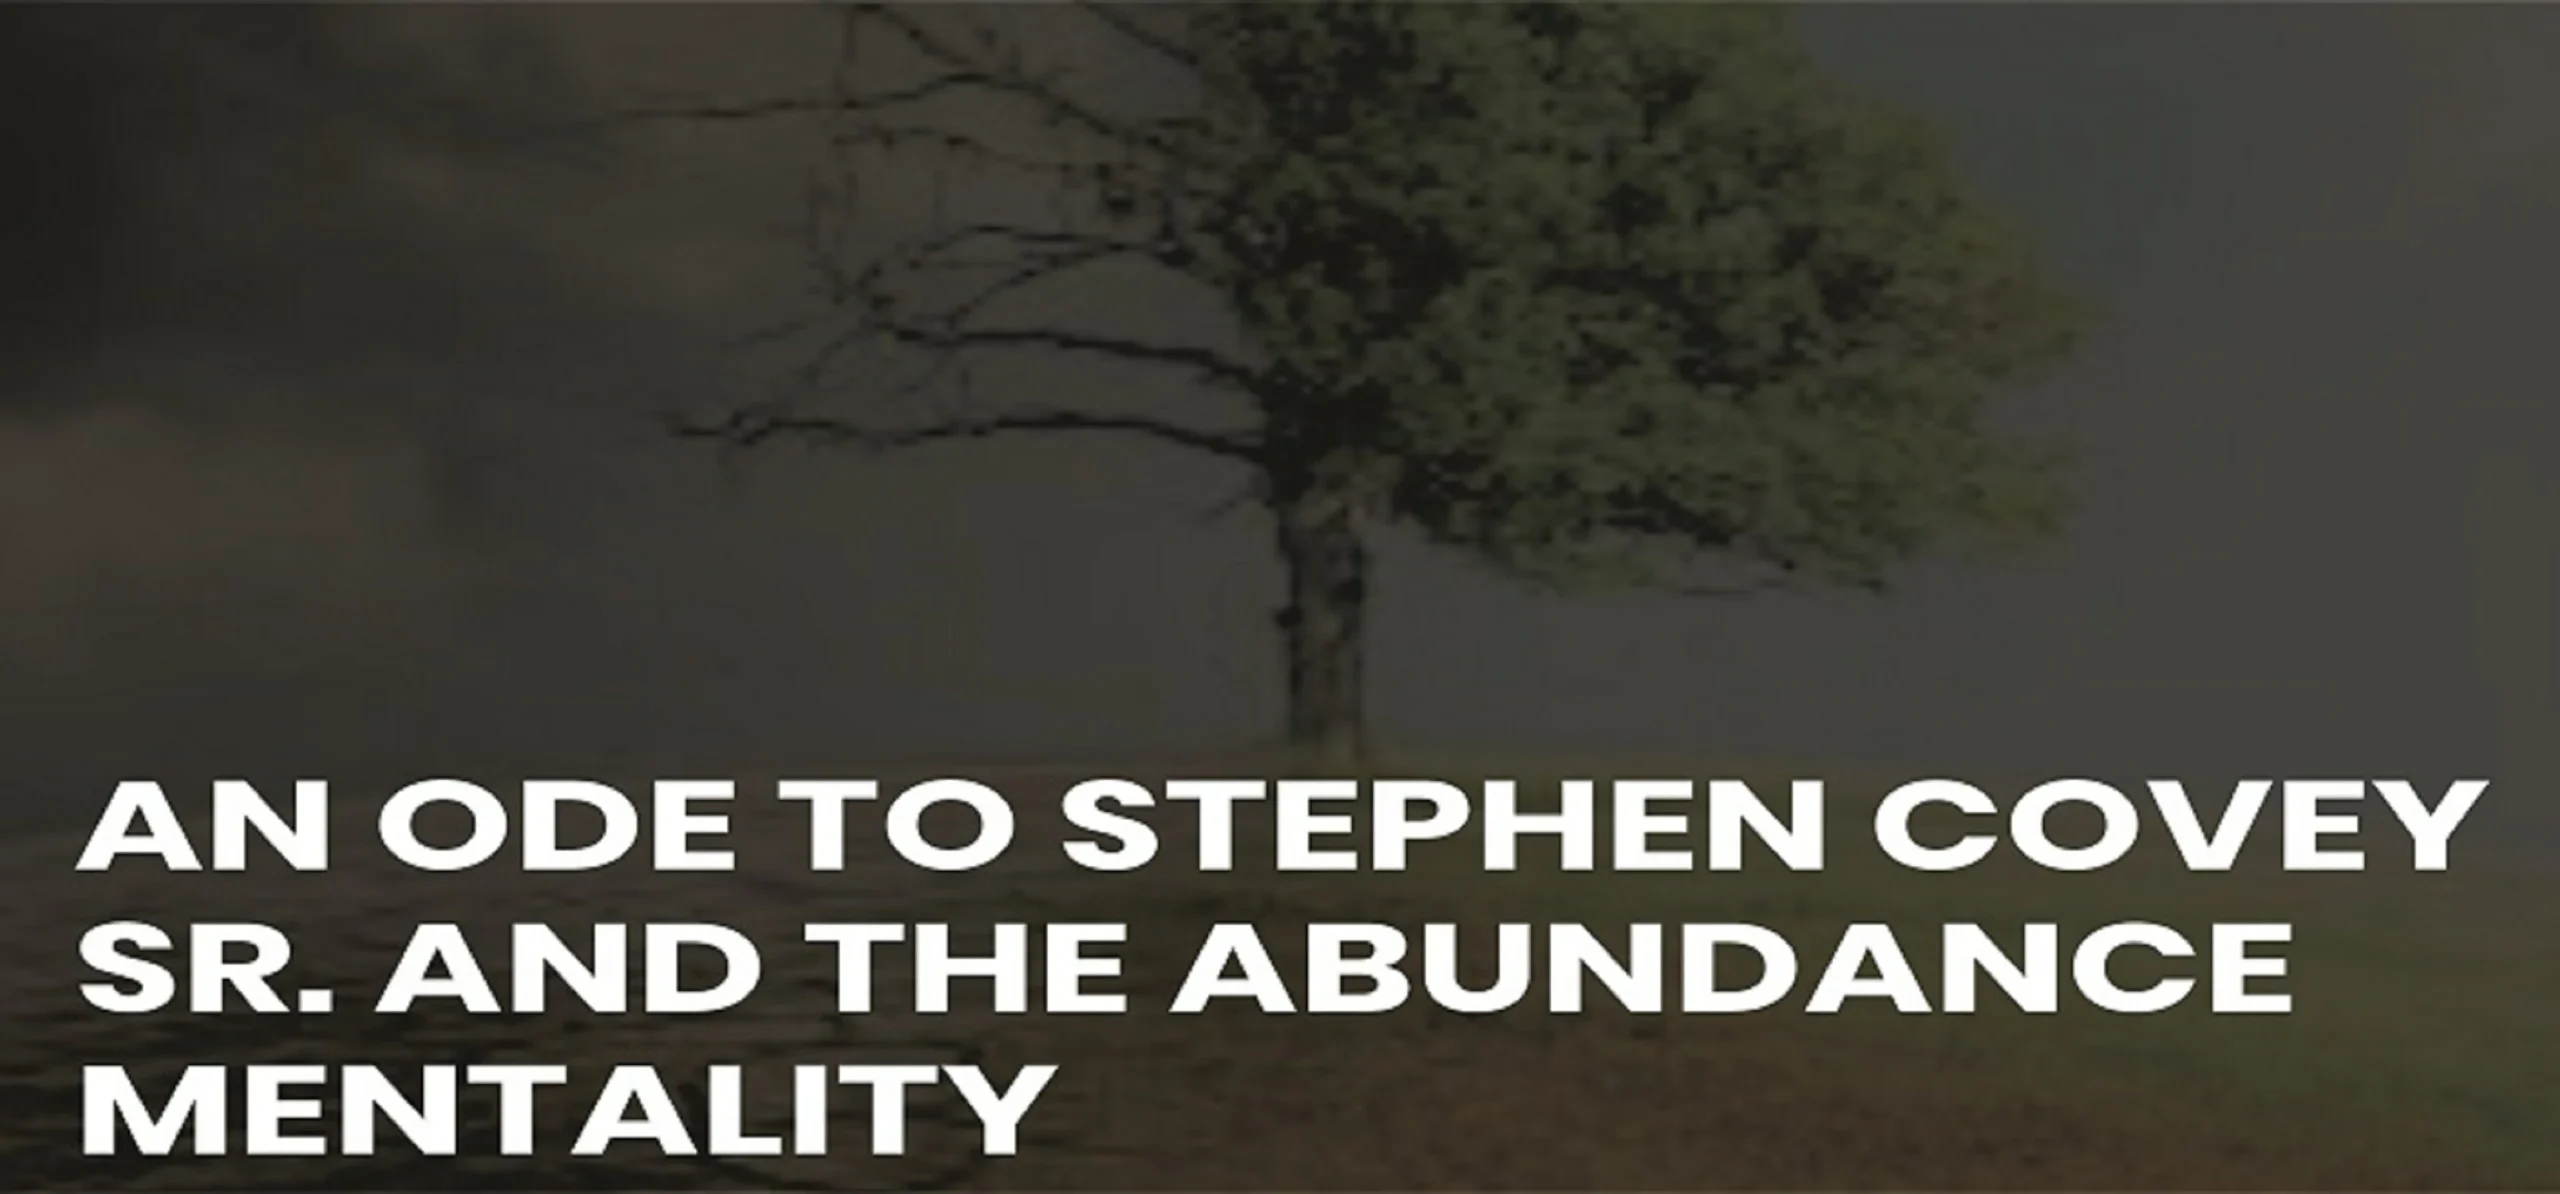 An Ode to Stephen Covey Sr. and The Abundance Mentality